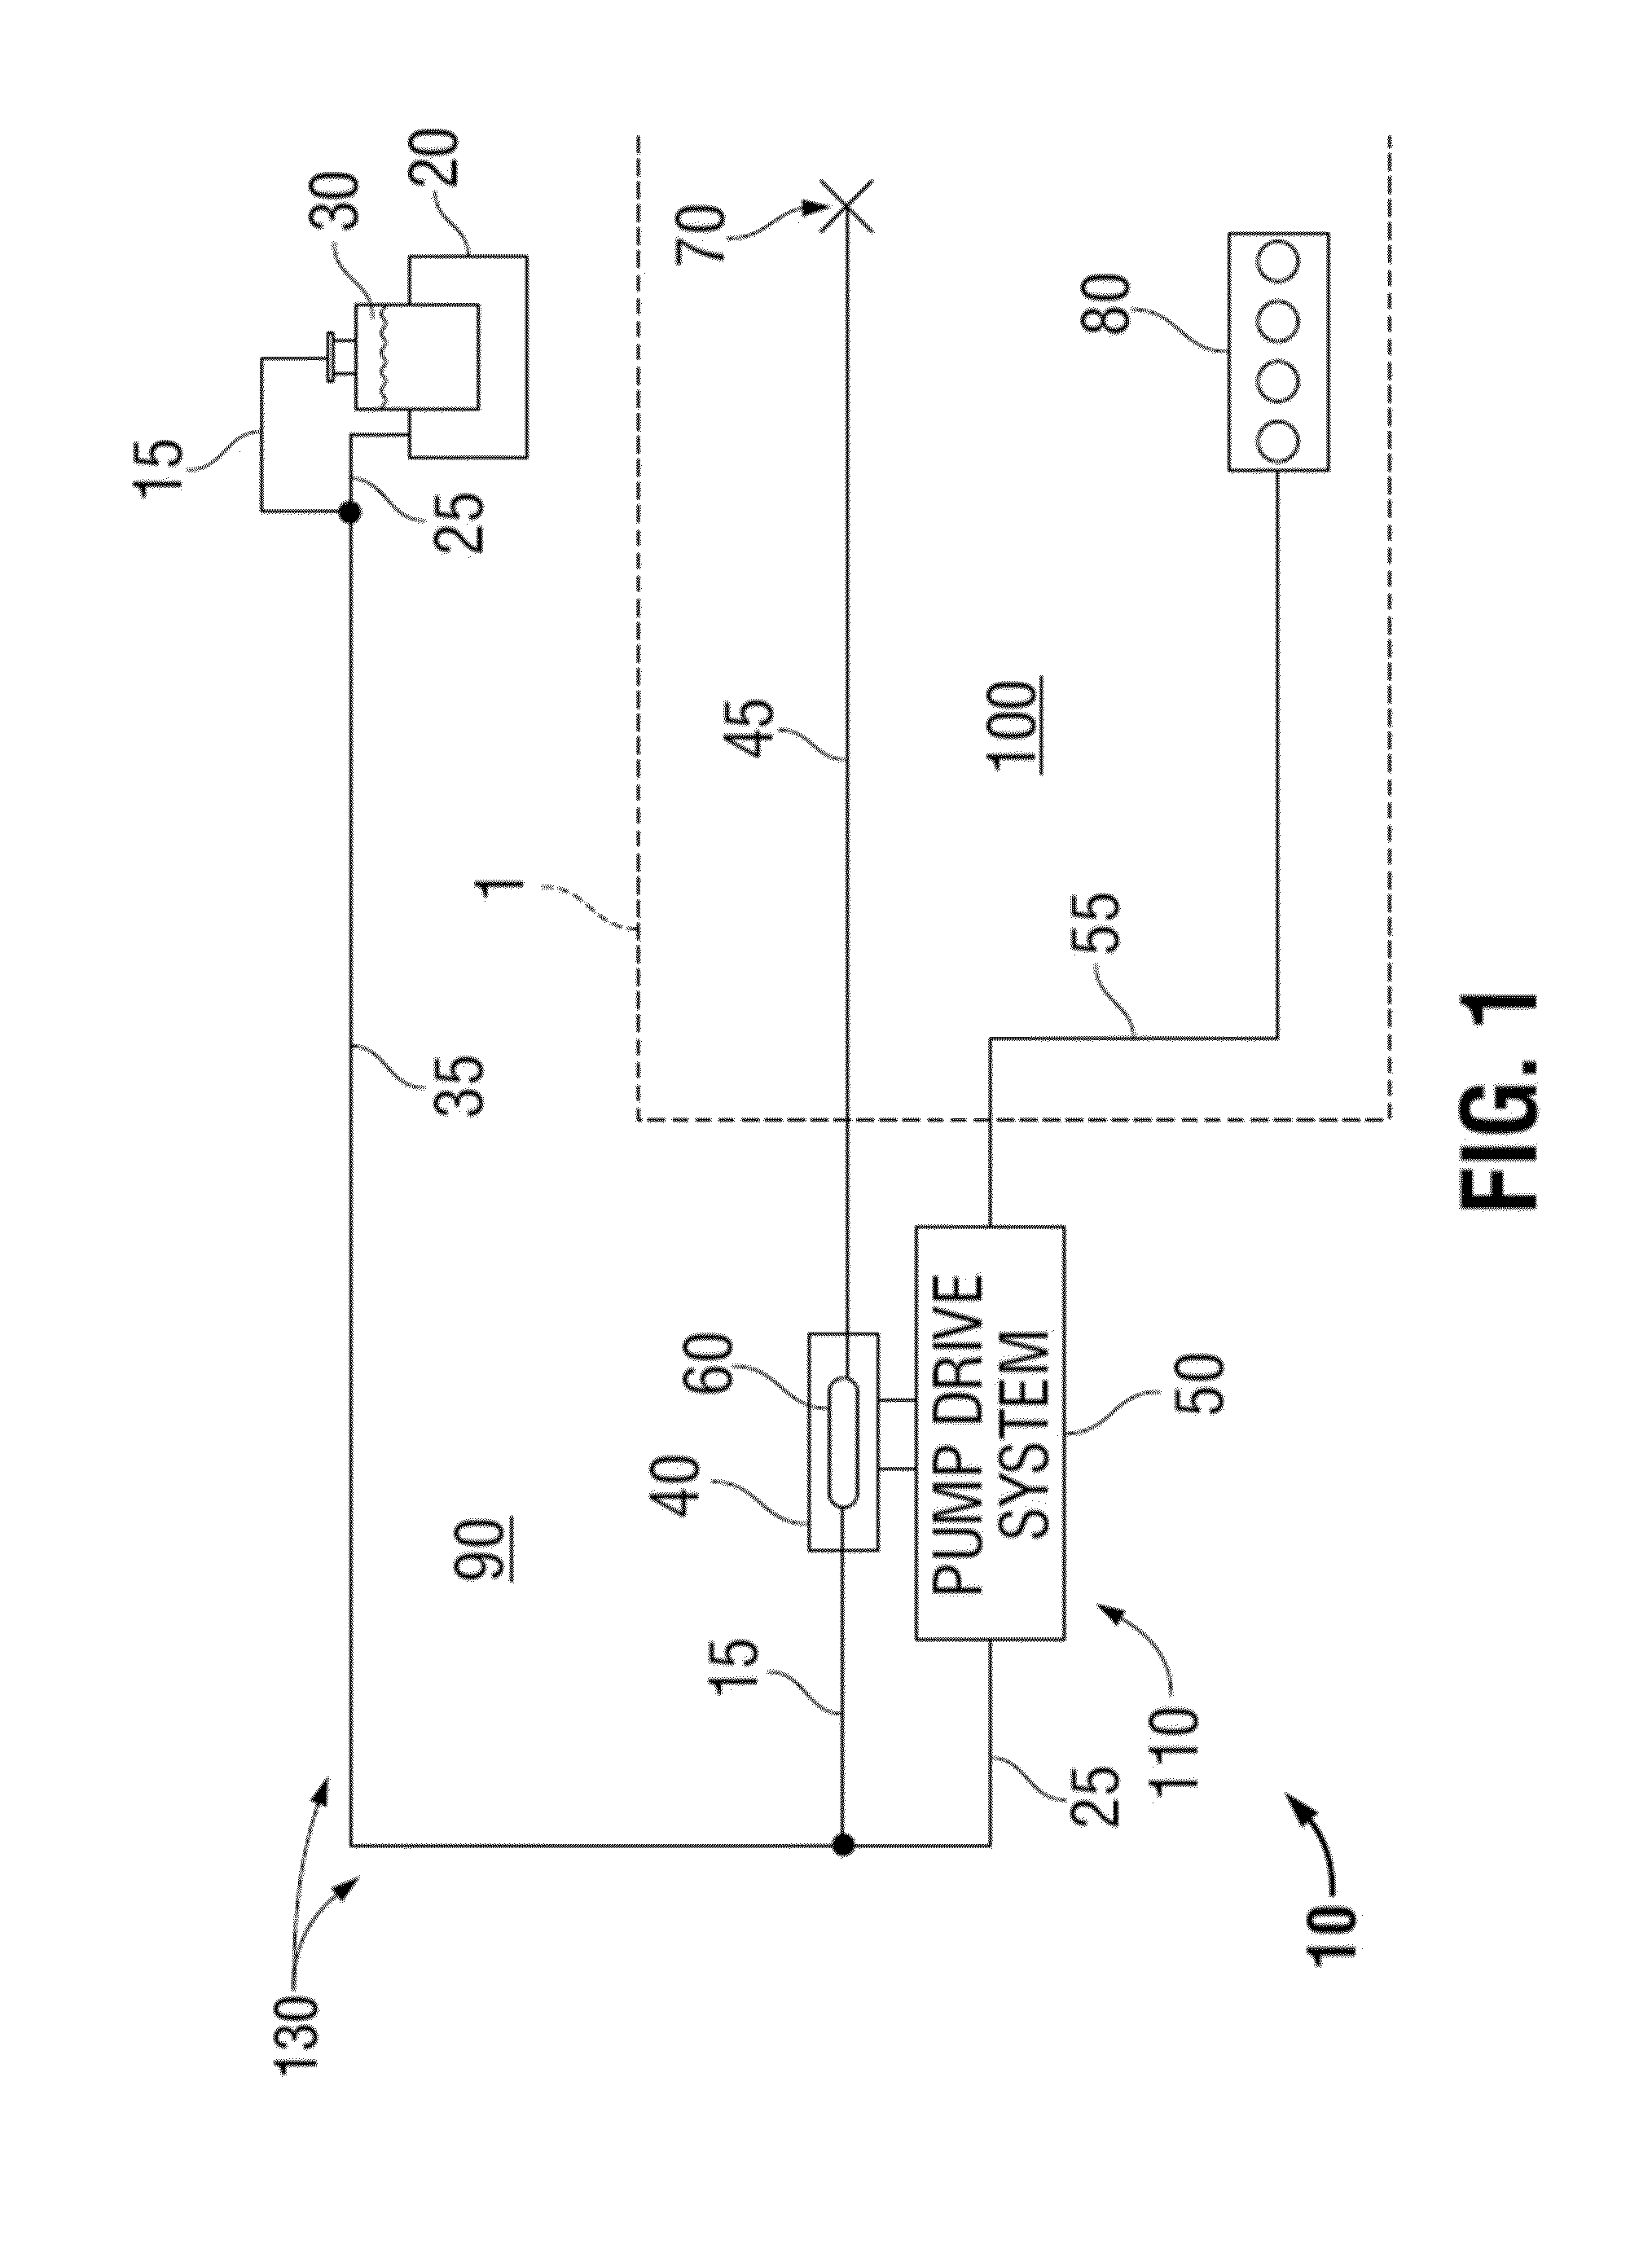 Integrated catheter and powered injector system for use in performing radial angiography